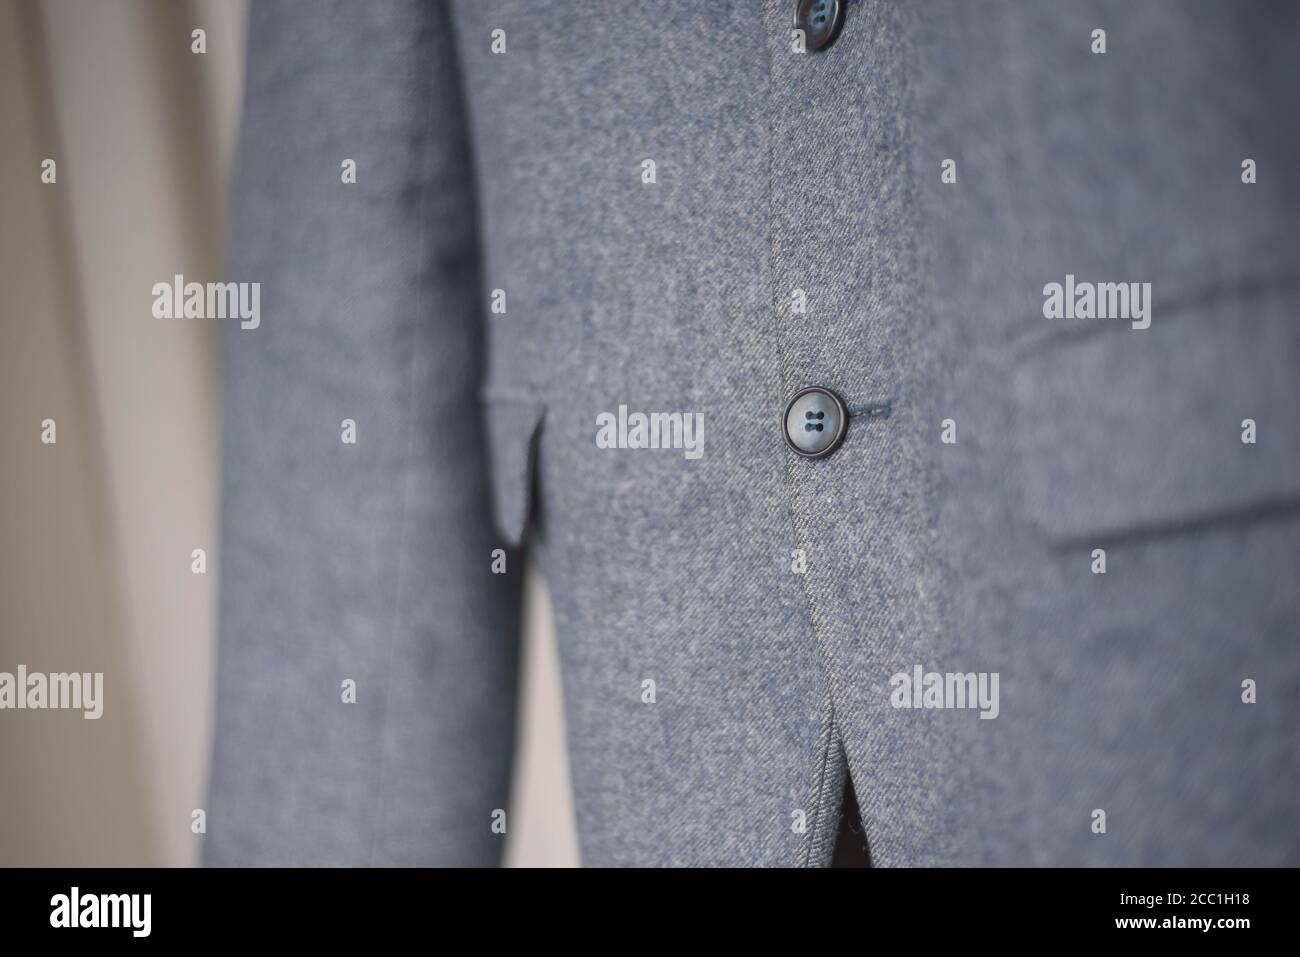 Close-up of a button on a blue business jacket Stock Photo